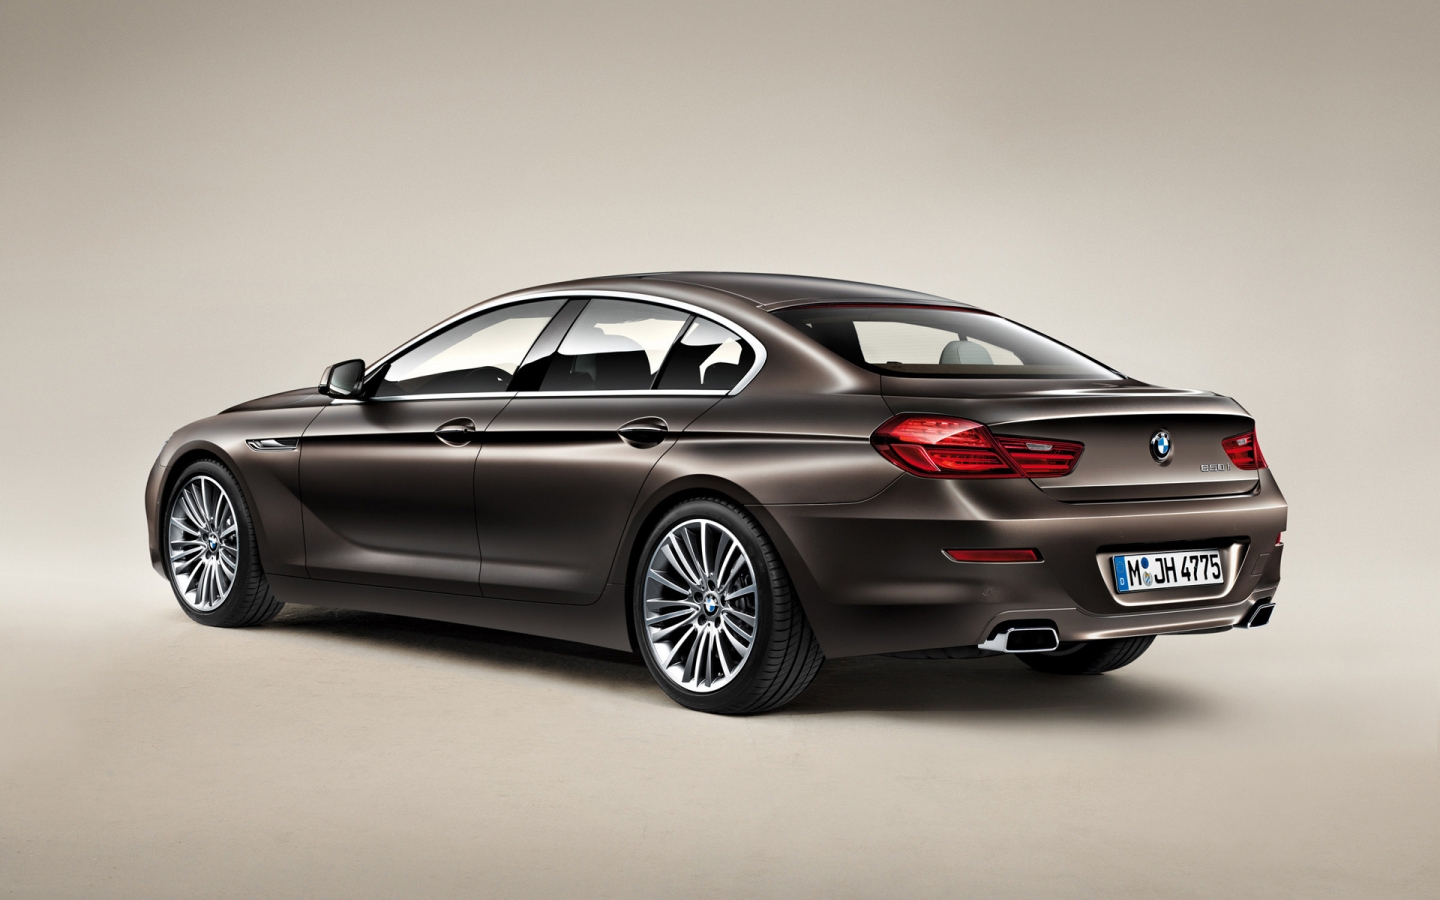 2013 BMW 6 Series Rear for 1440 x 900 widescreen resolution